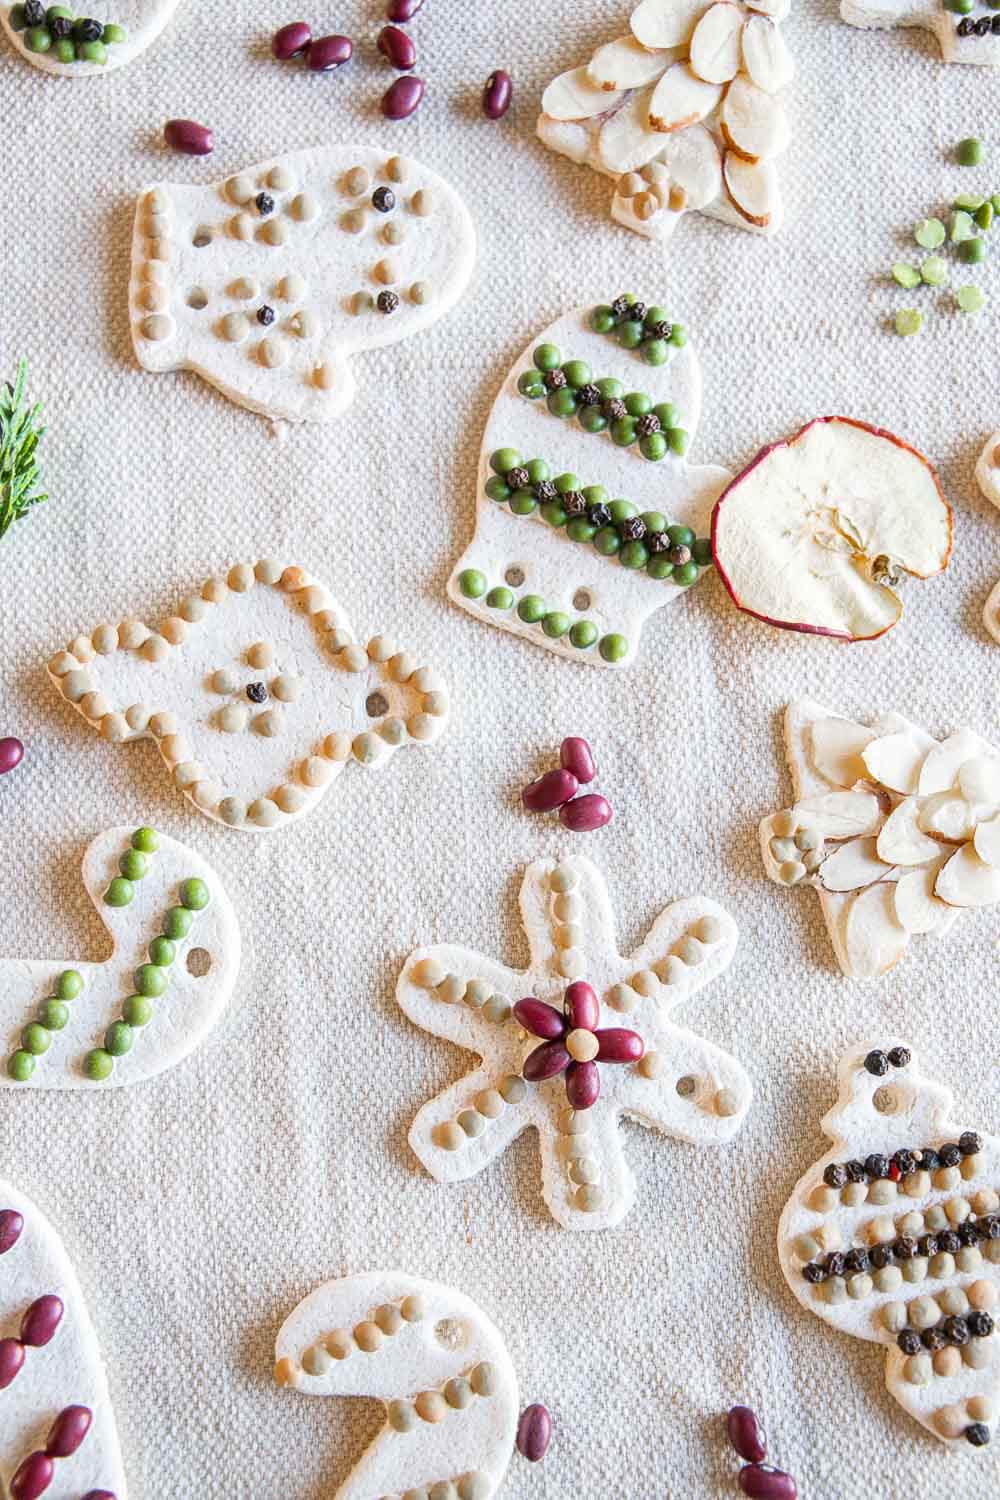 Salt Dough Christmas Ornaments You Can Use for Anything!